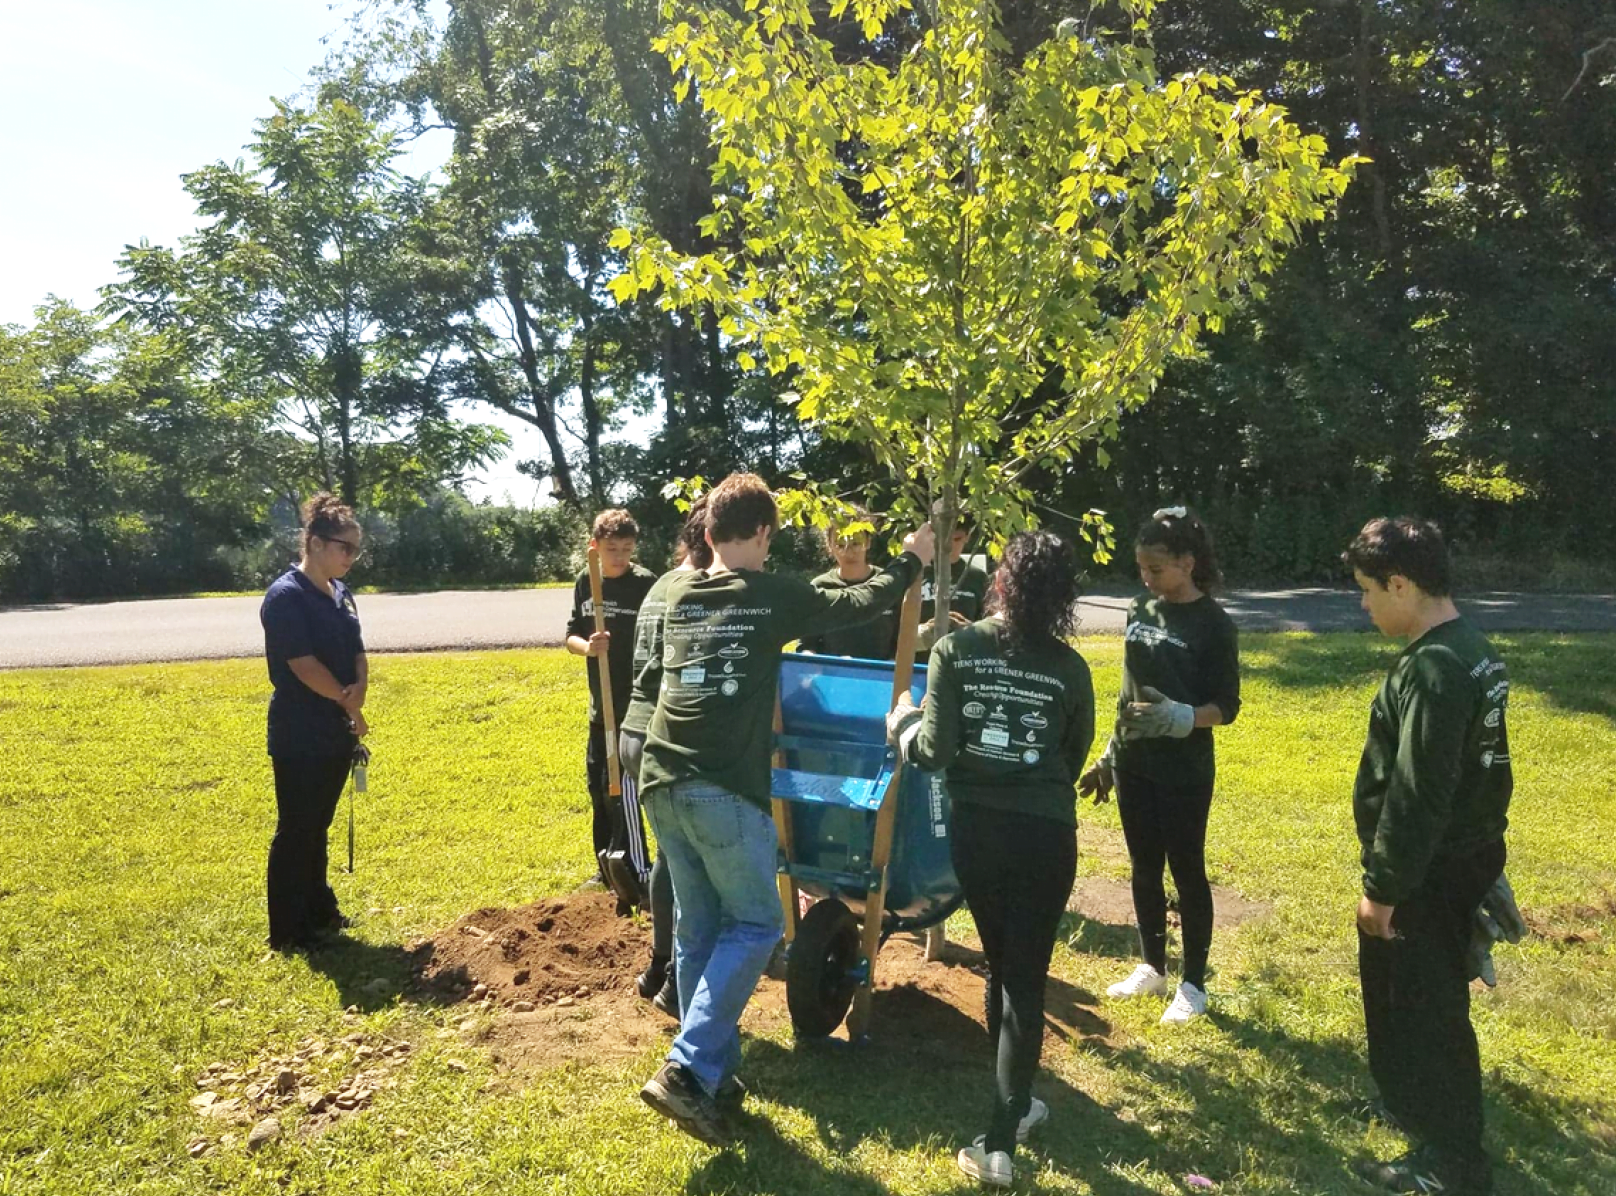 Greenwich Youth Conservation Program (GYCP) Members adding soil to a planted tree. Photo: Anne Marie Kristoff